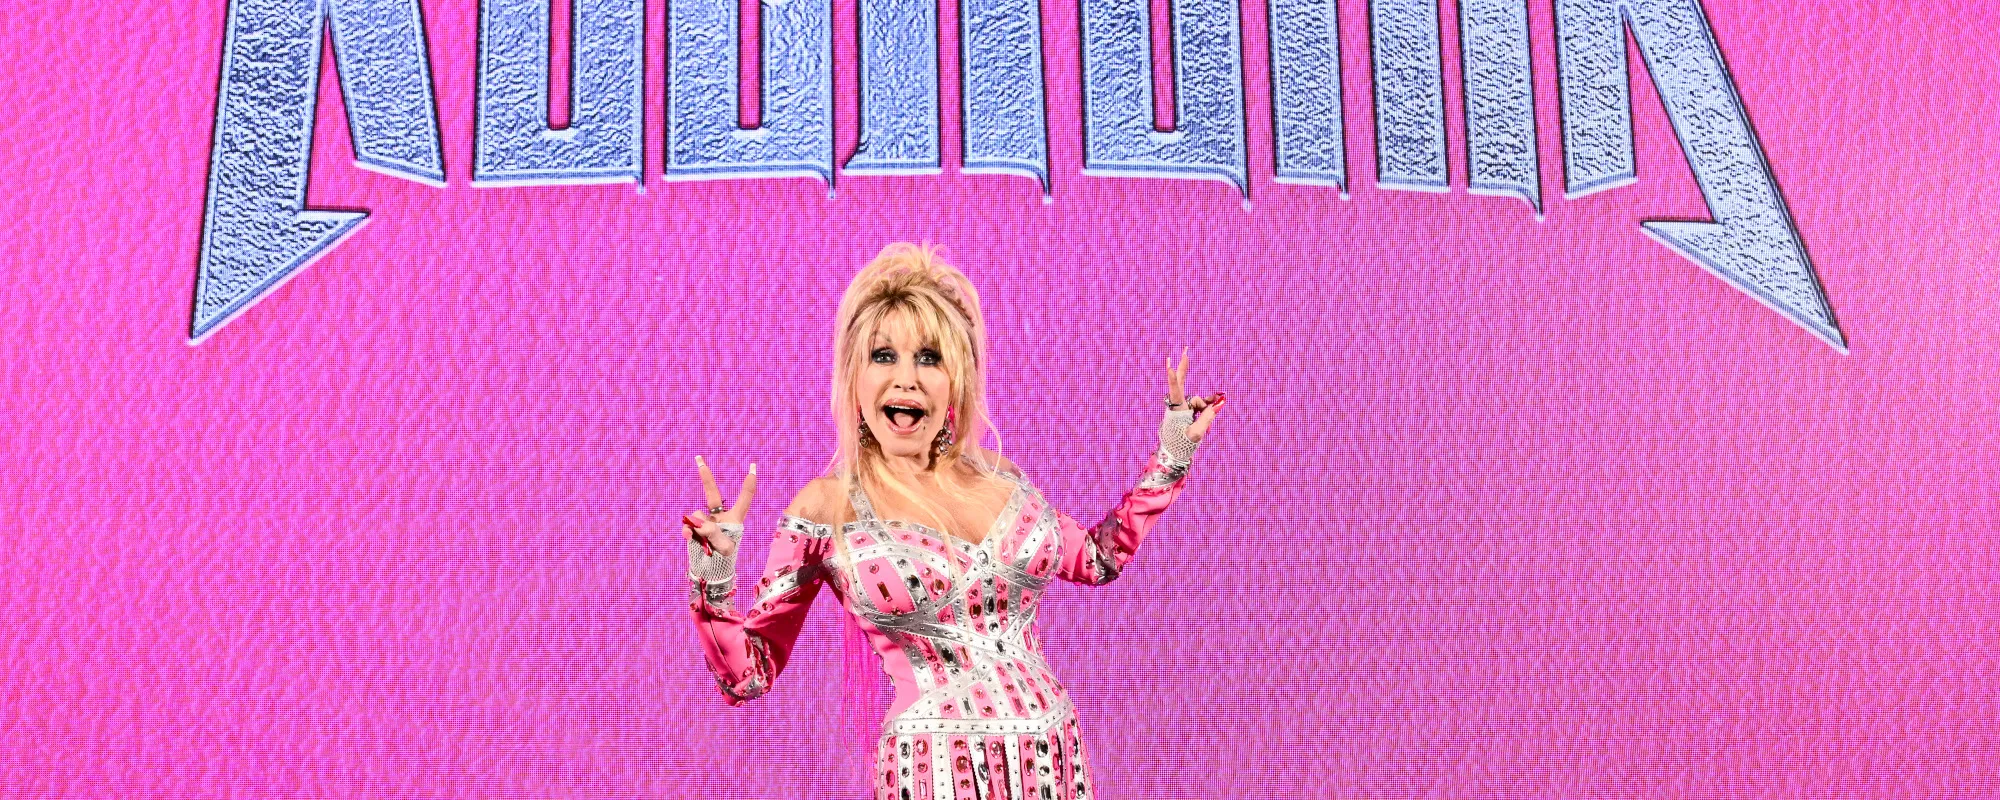 3 Dolly Parton Concerts Every Fan Should See